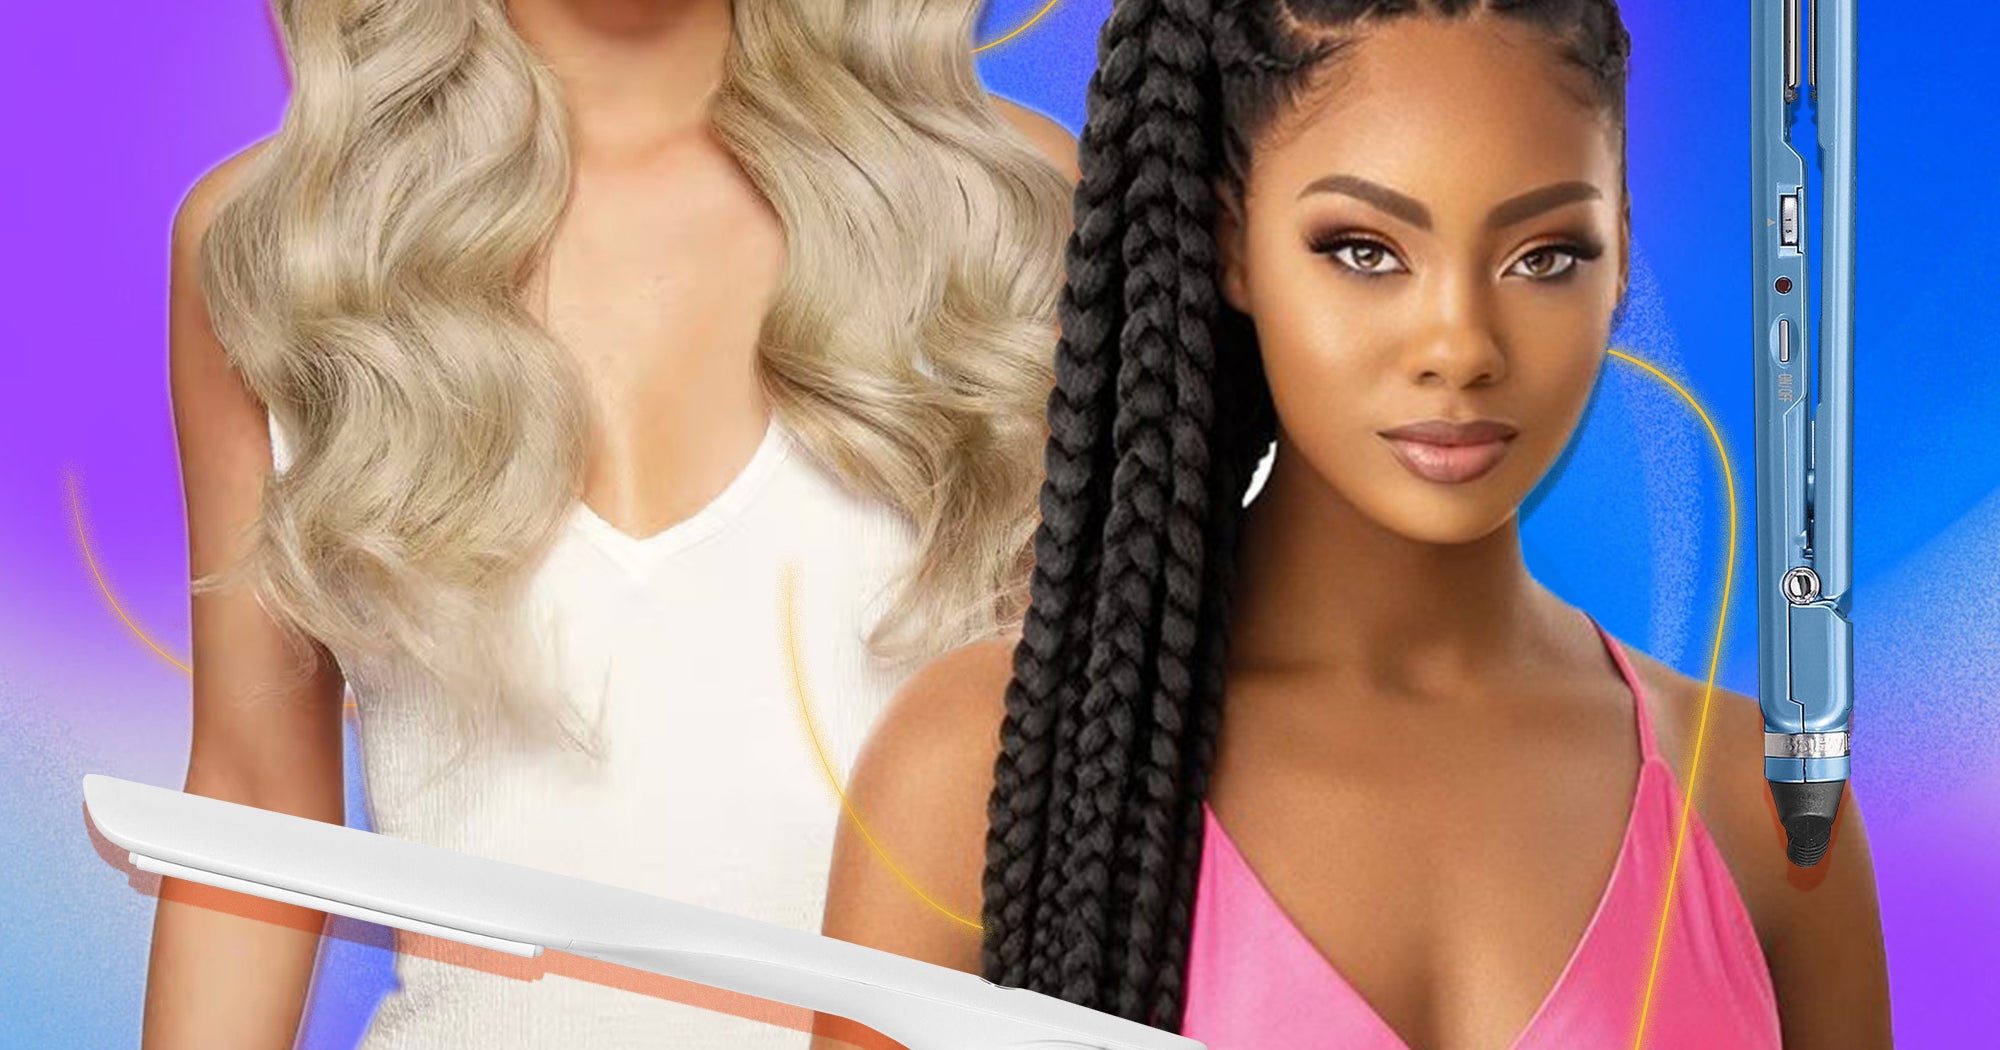 The Best Wigs, Weaves & Hair Extensions, According To Industry Experts